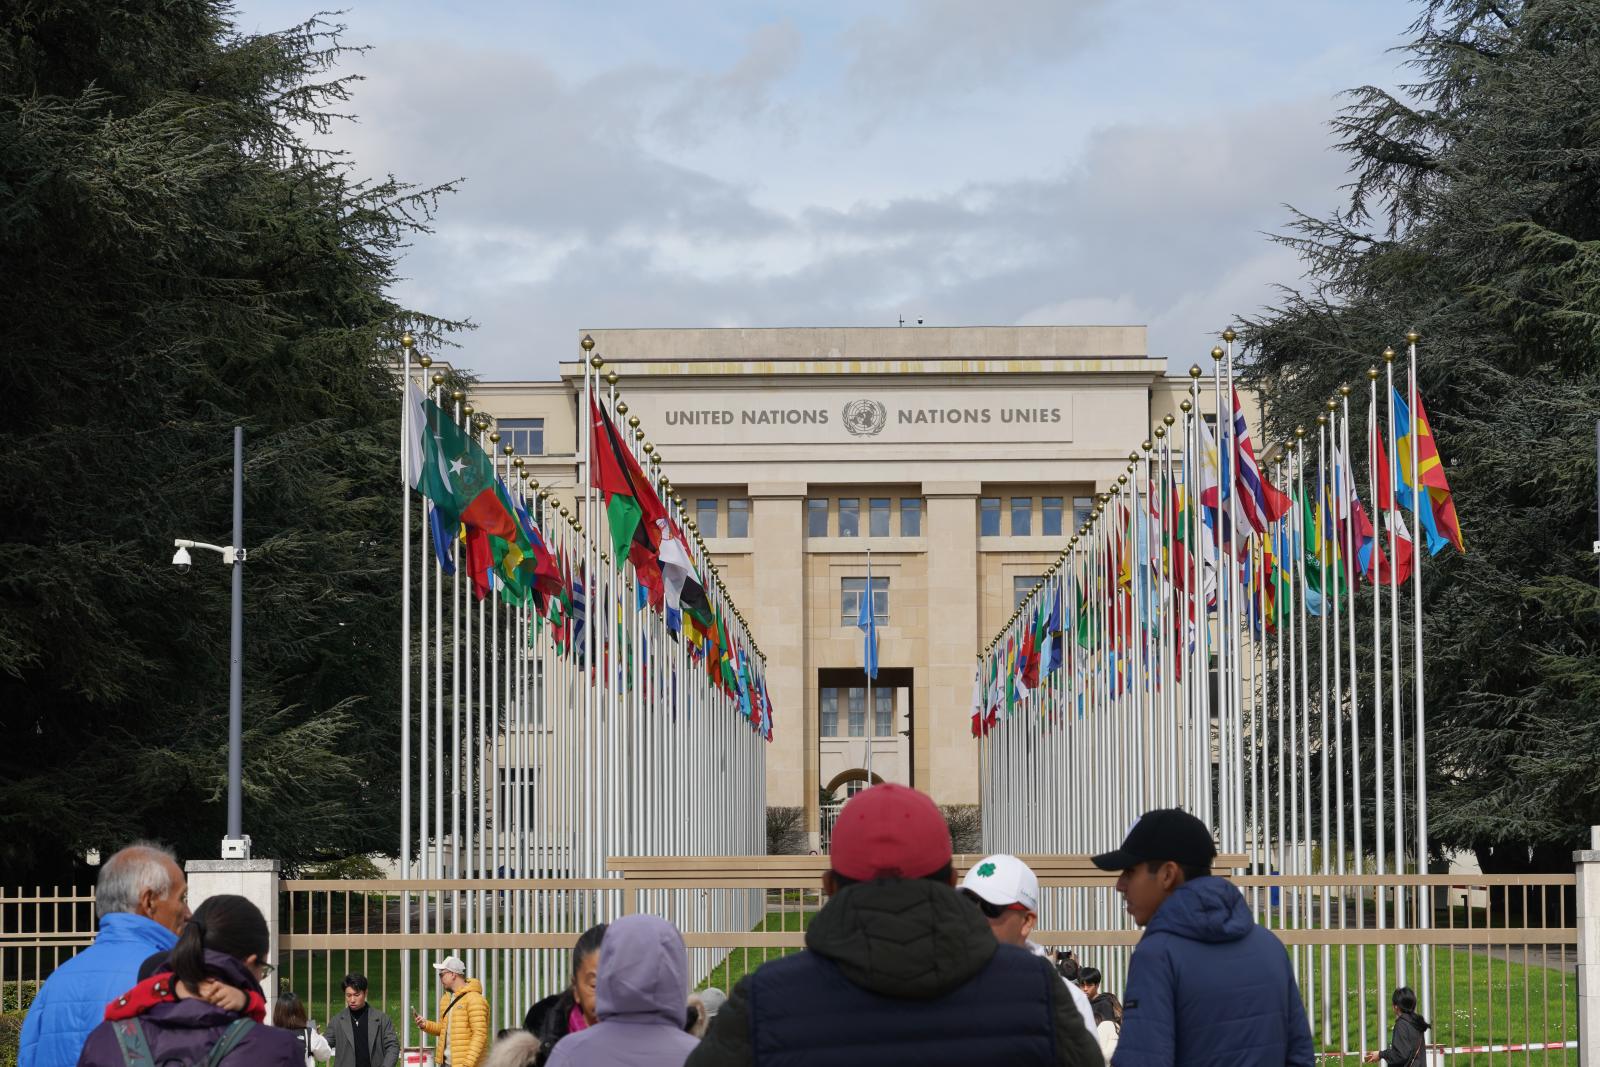 People at the United Nations Building in Geneva | Buy this image